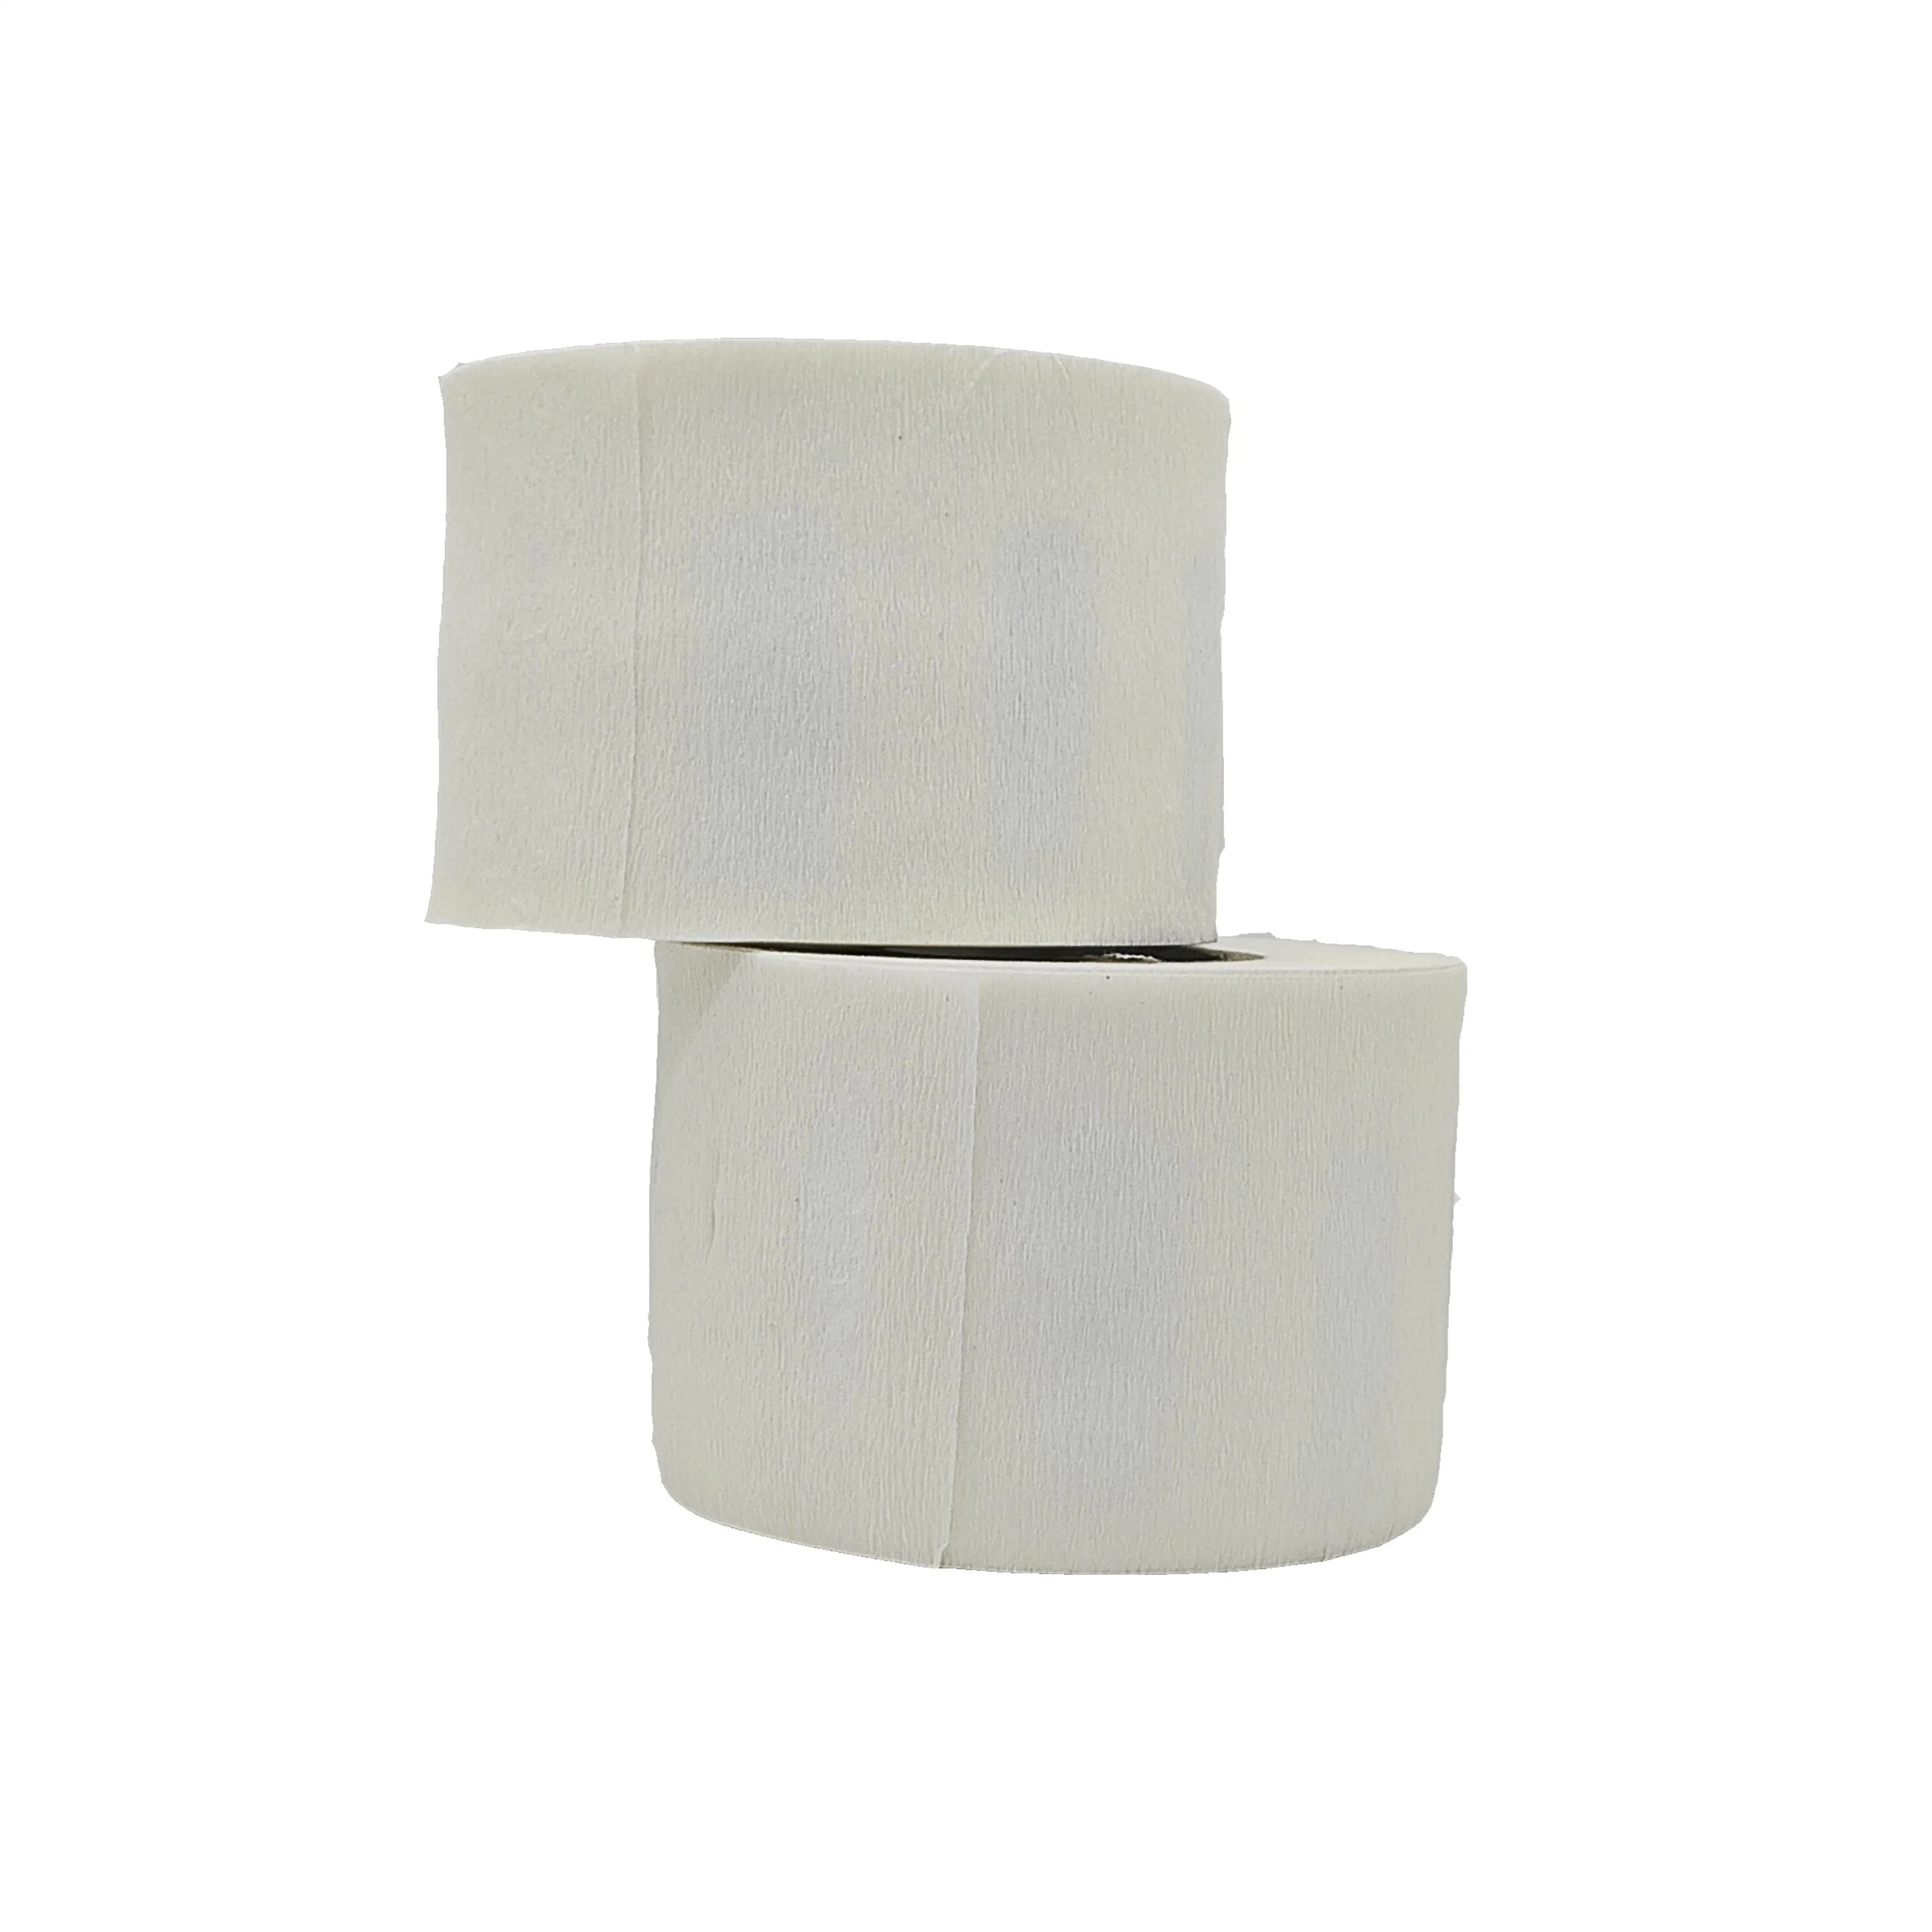 Hot White Anti Static Neck Roll Paper in Stock